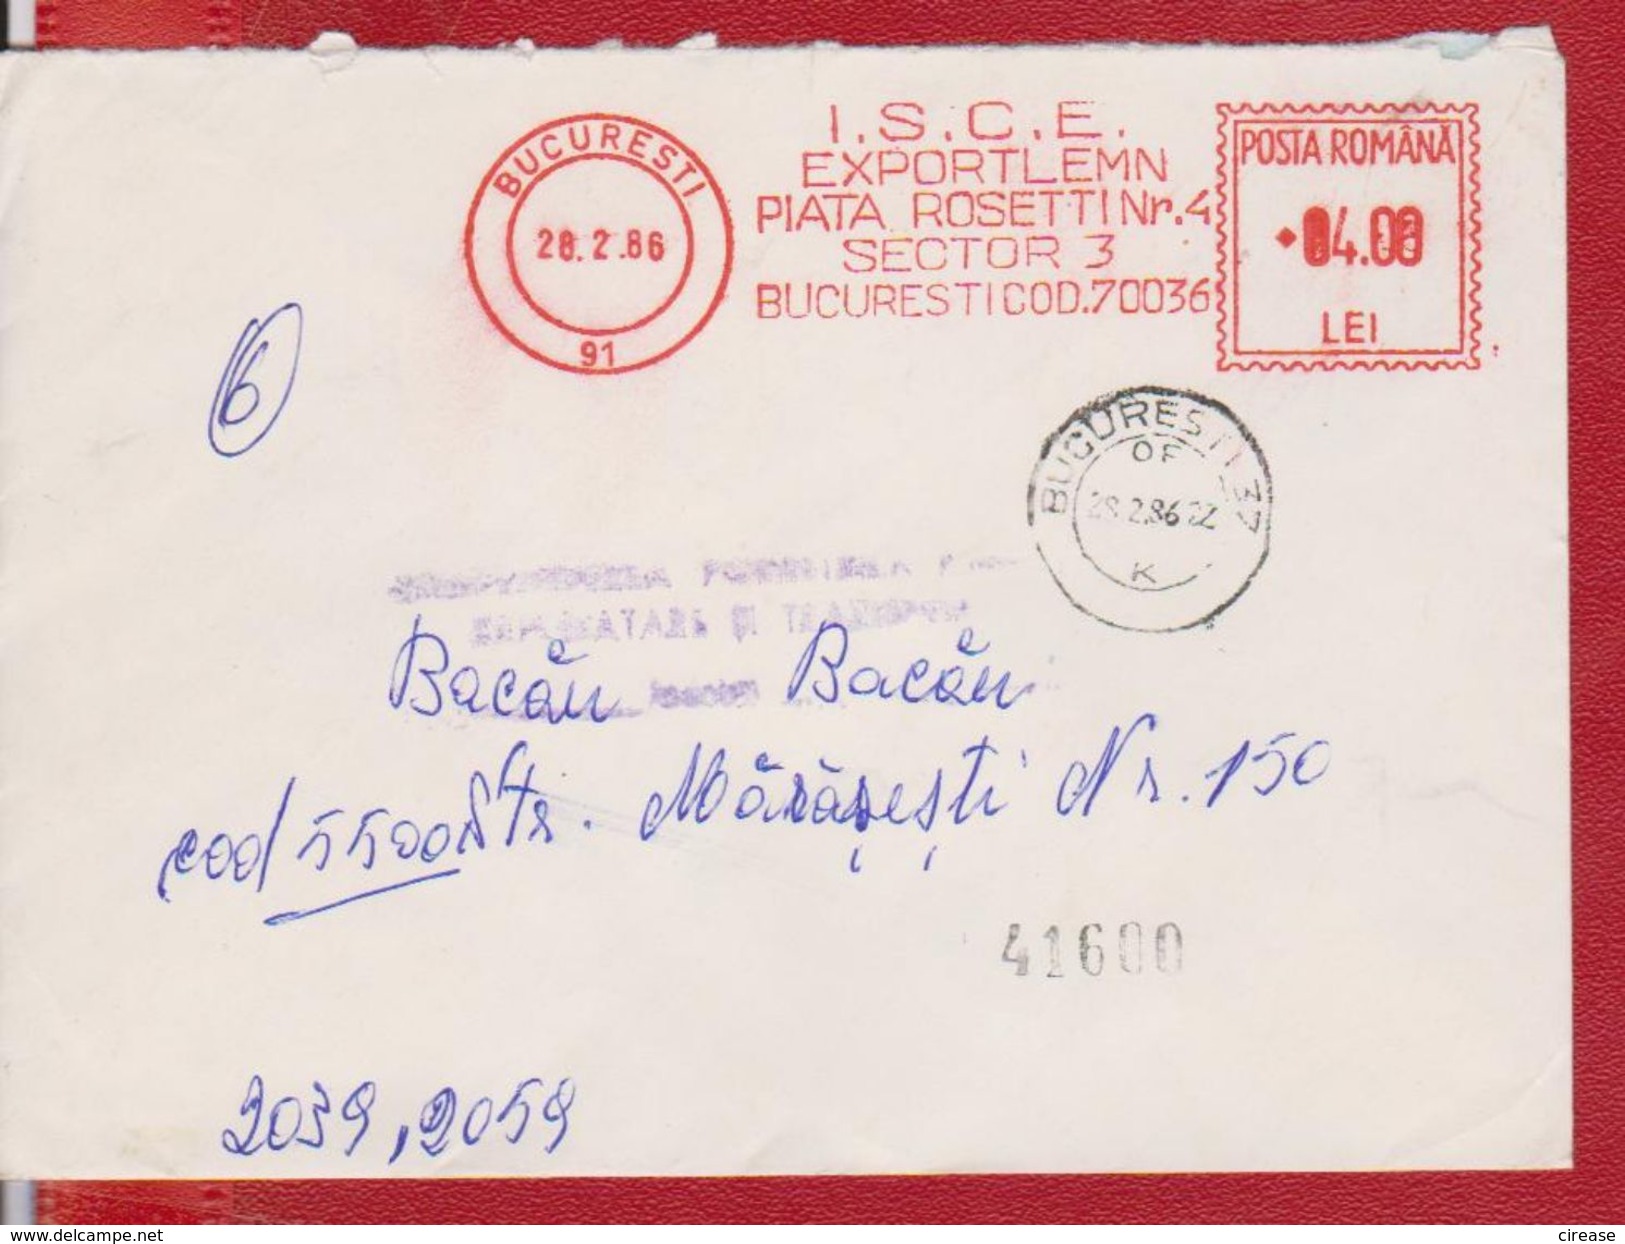 POSTAL HISTORY COVER, WITH MACHINE RED STAMP EXPORT WOOD FOREST TREE ROMANIA COVER - Timbres De Distributeurs [ATM]